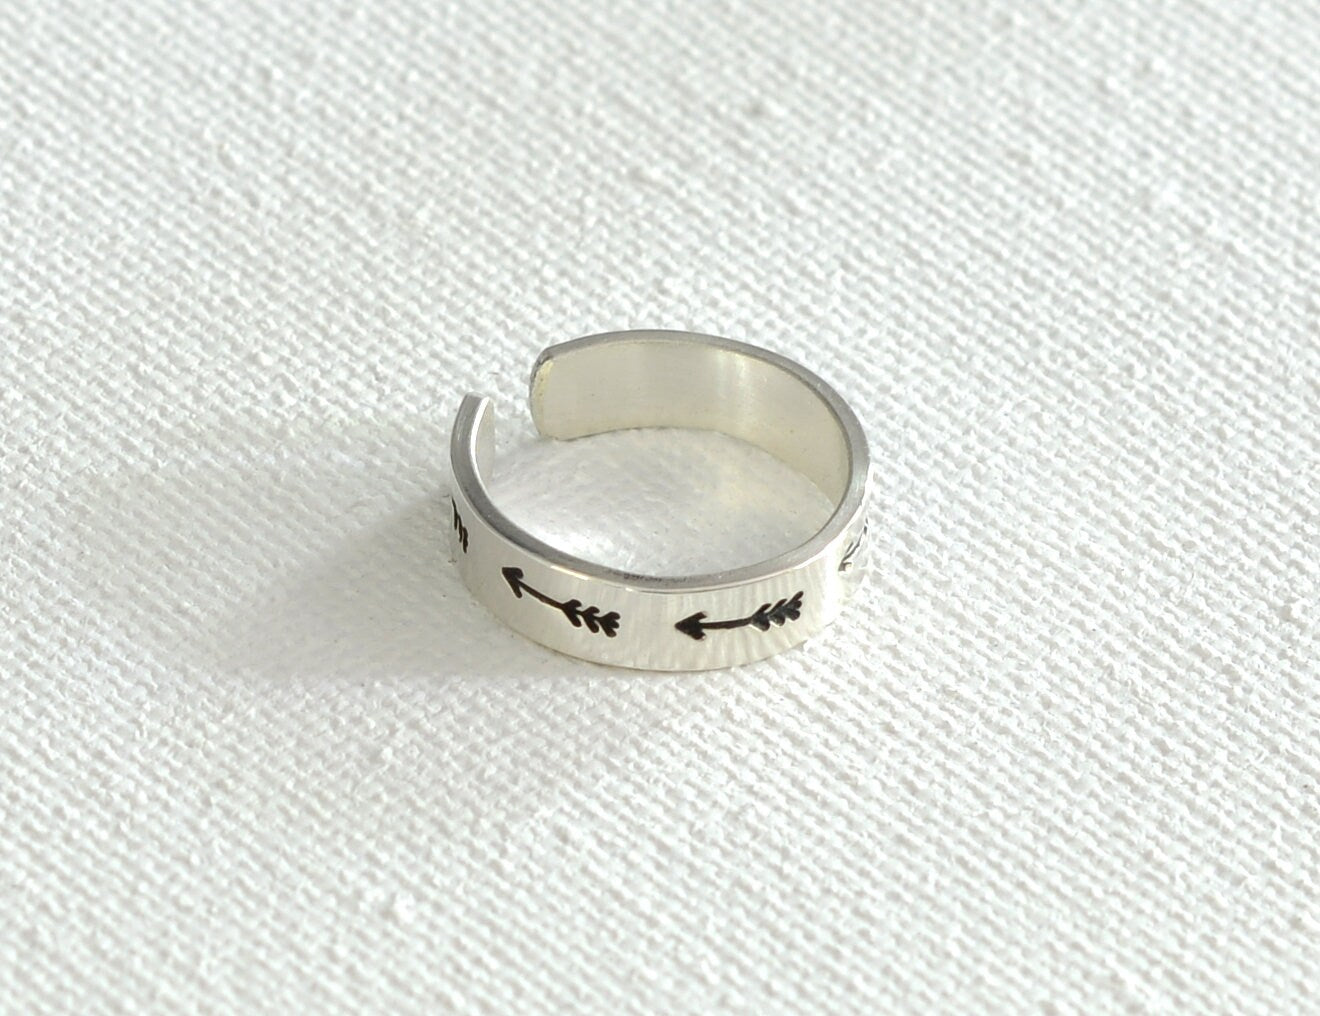 Sterling silver toe ring with arrows on narrow 925 adjustable band